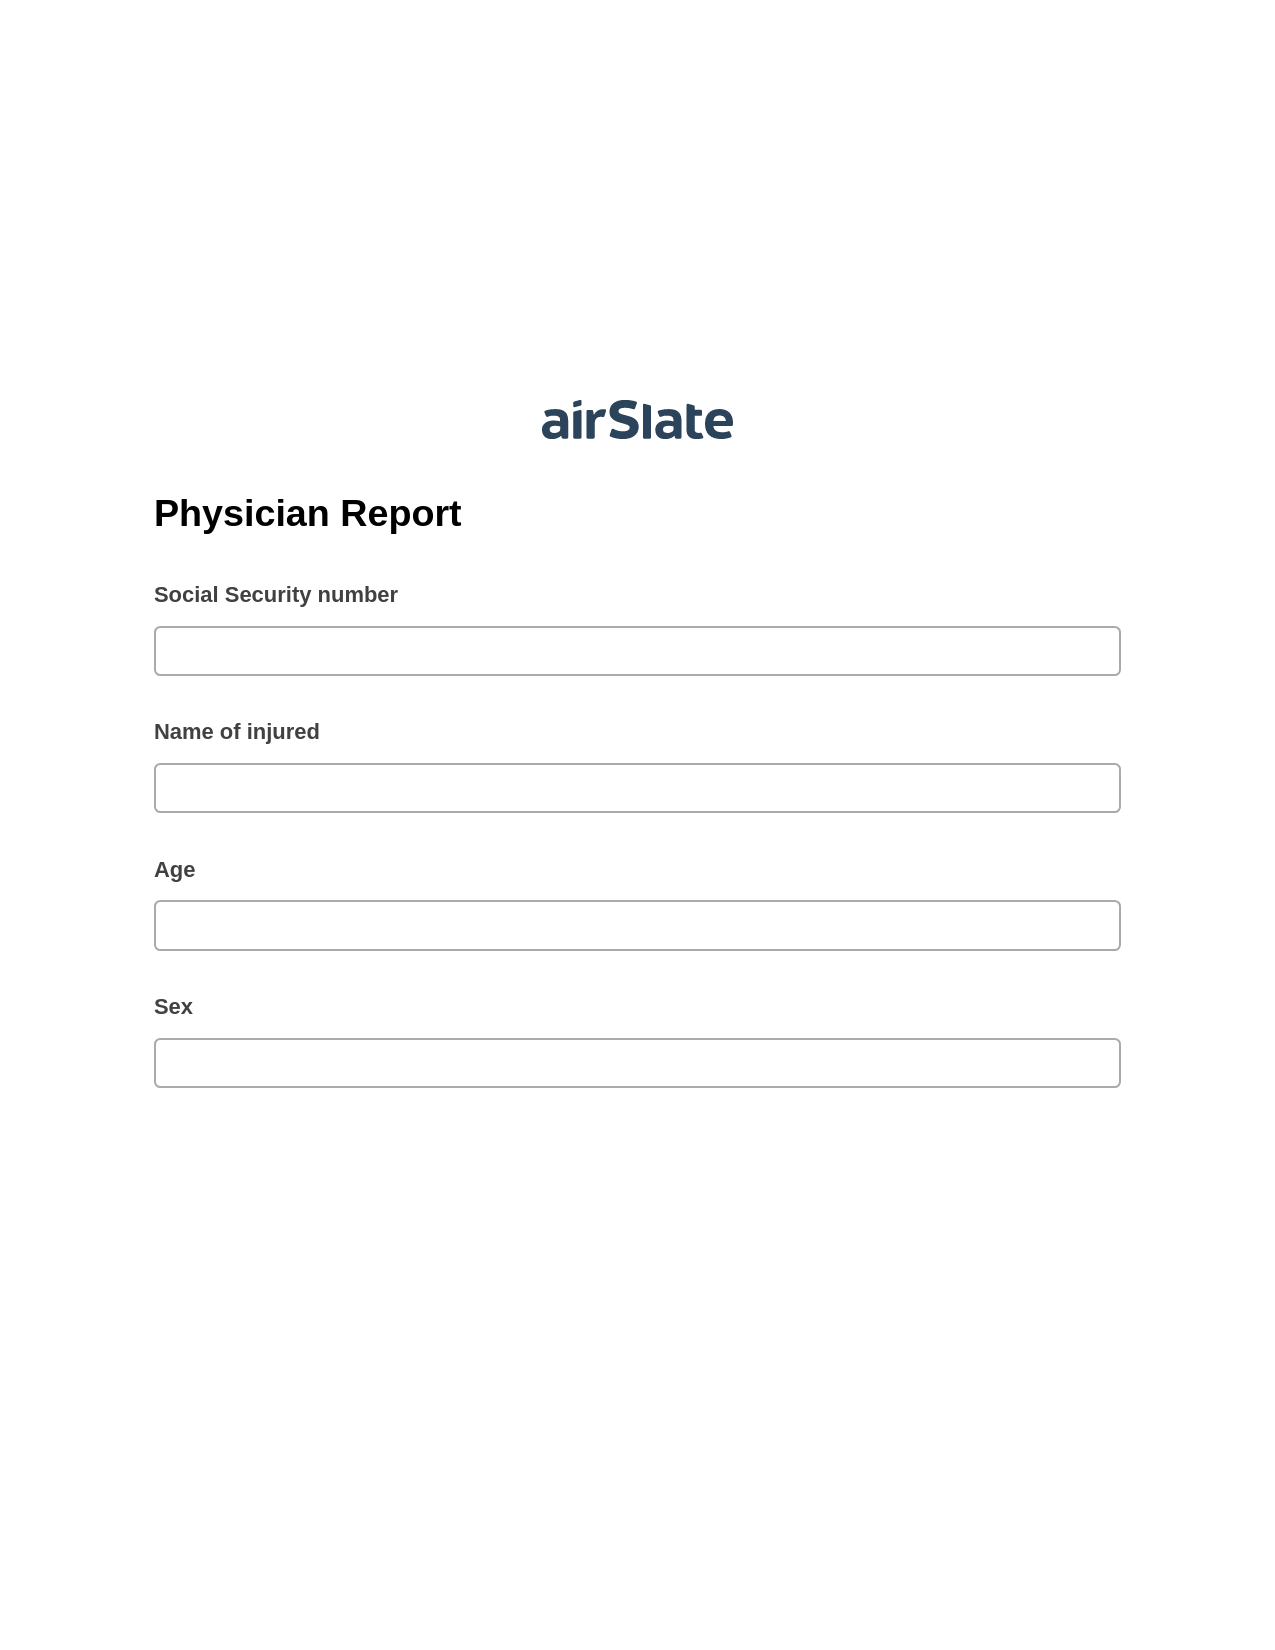 Physician Report Pre-fill from MS Dynamics 365 Records, Update NetSuite Record Bot, Archive to Google Drive Bot